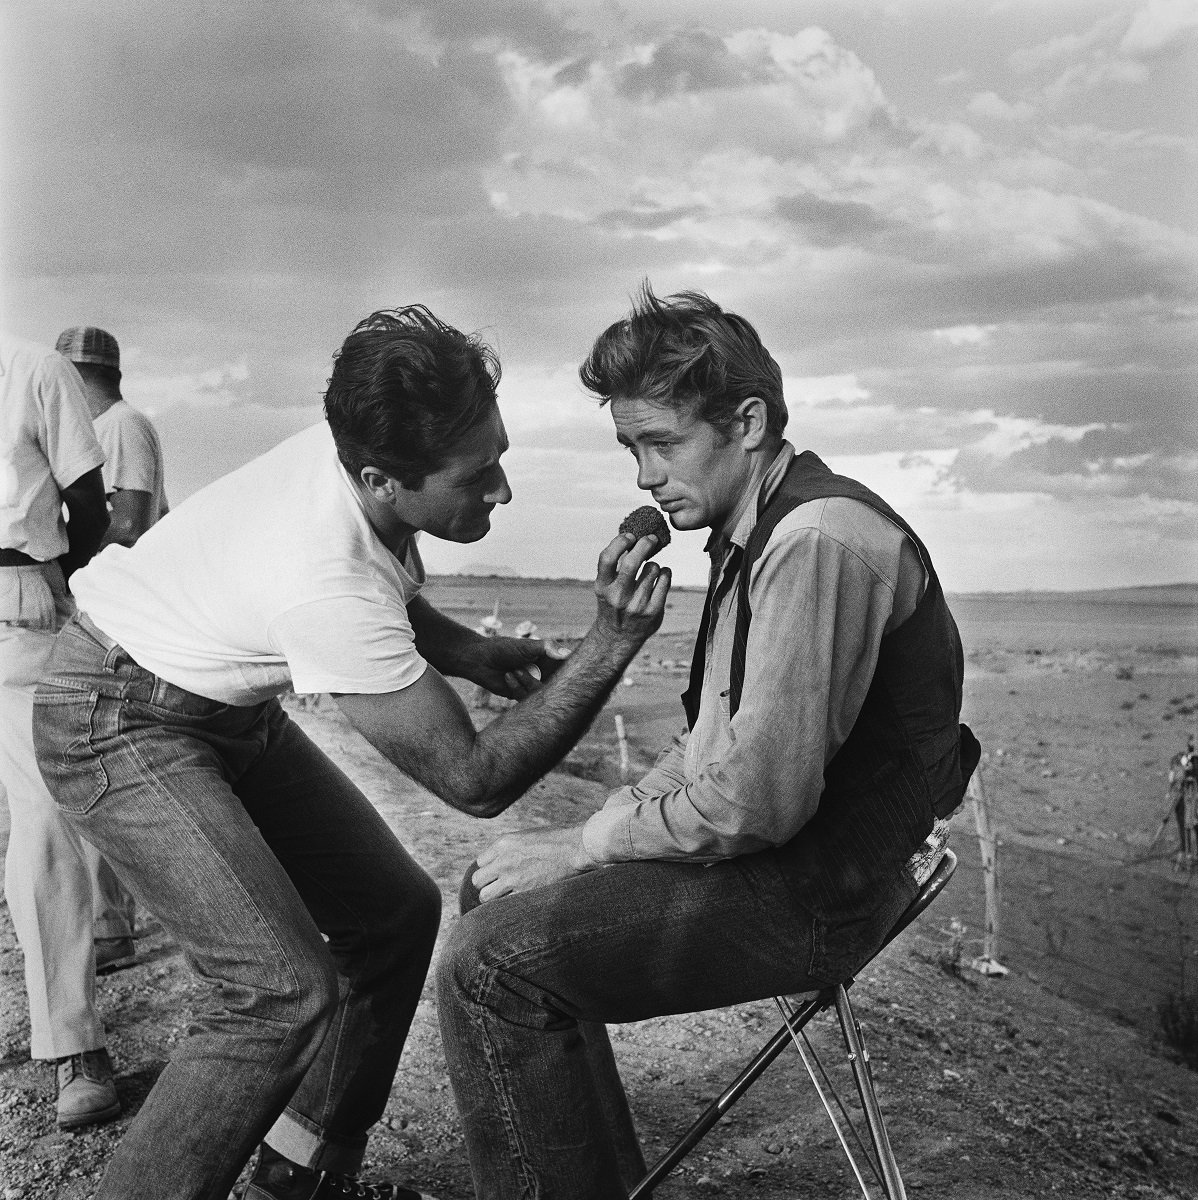 James Dean on the set of the movie "Giant" in July 1955 in Marfa, Texas